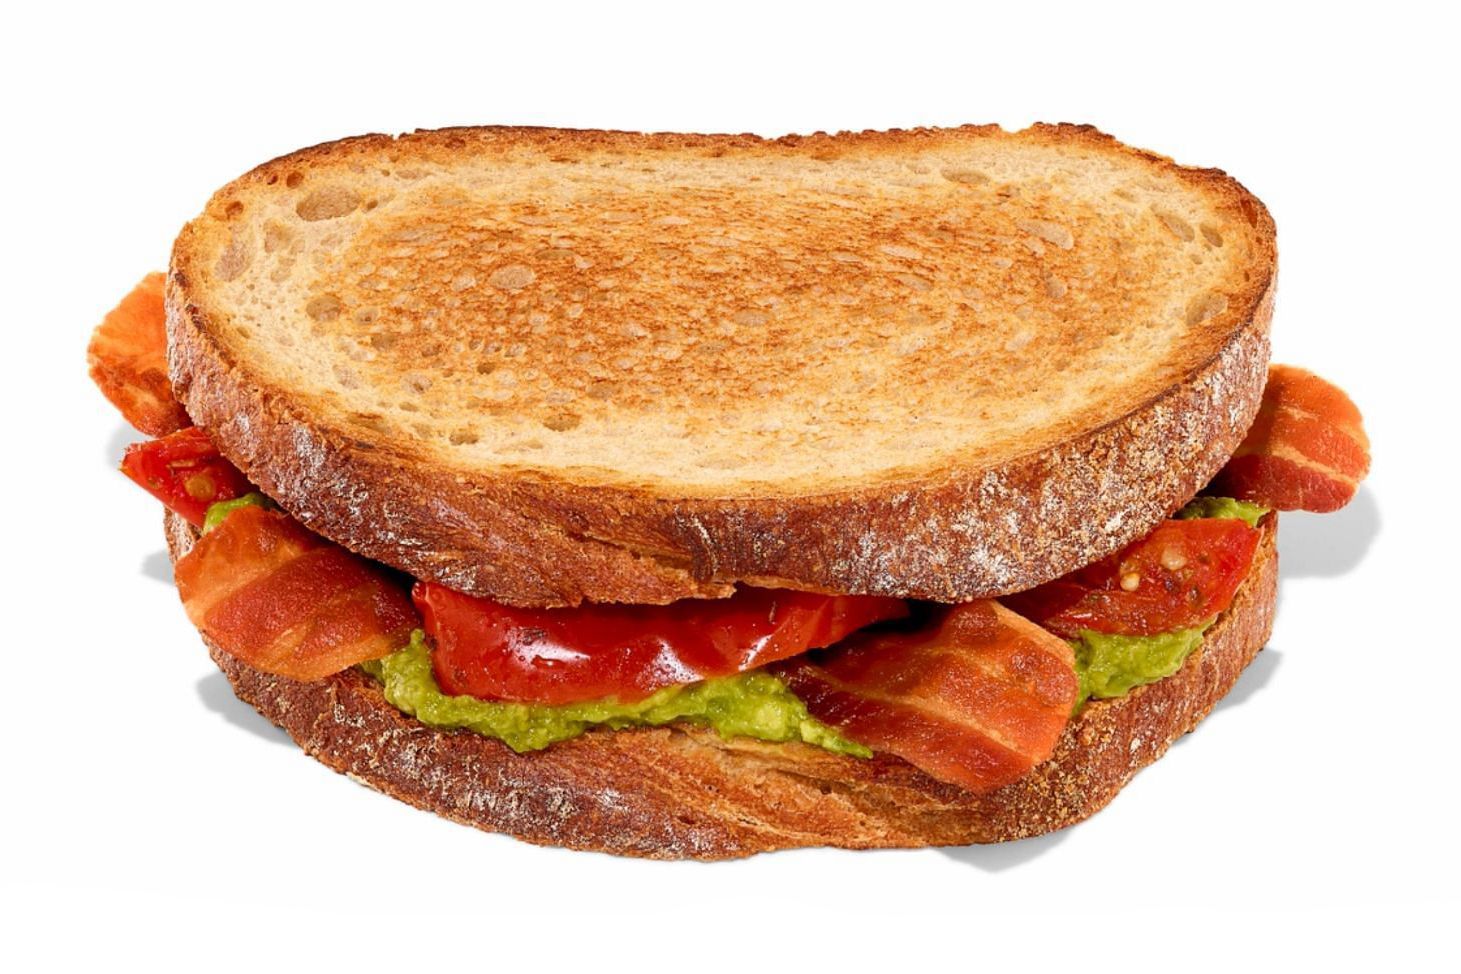 The New Bacon Avocado Tomato Sandwich Lands at Dunkin’ Donuts this Winter